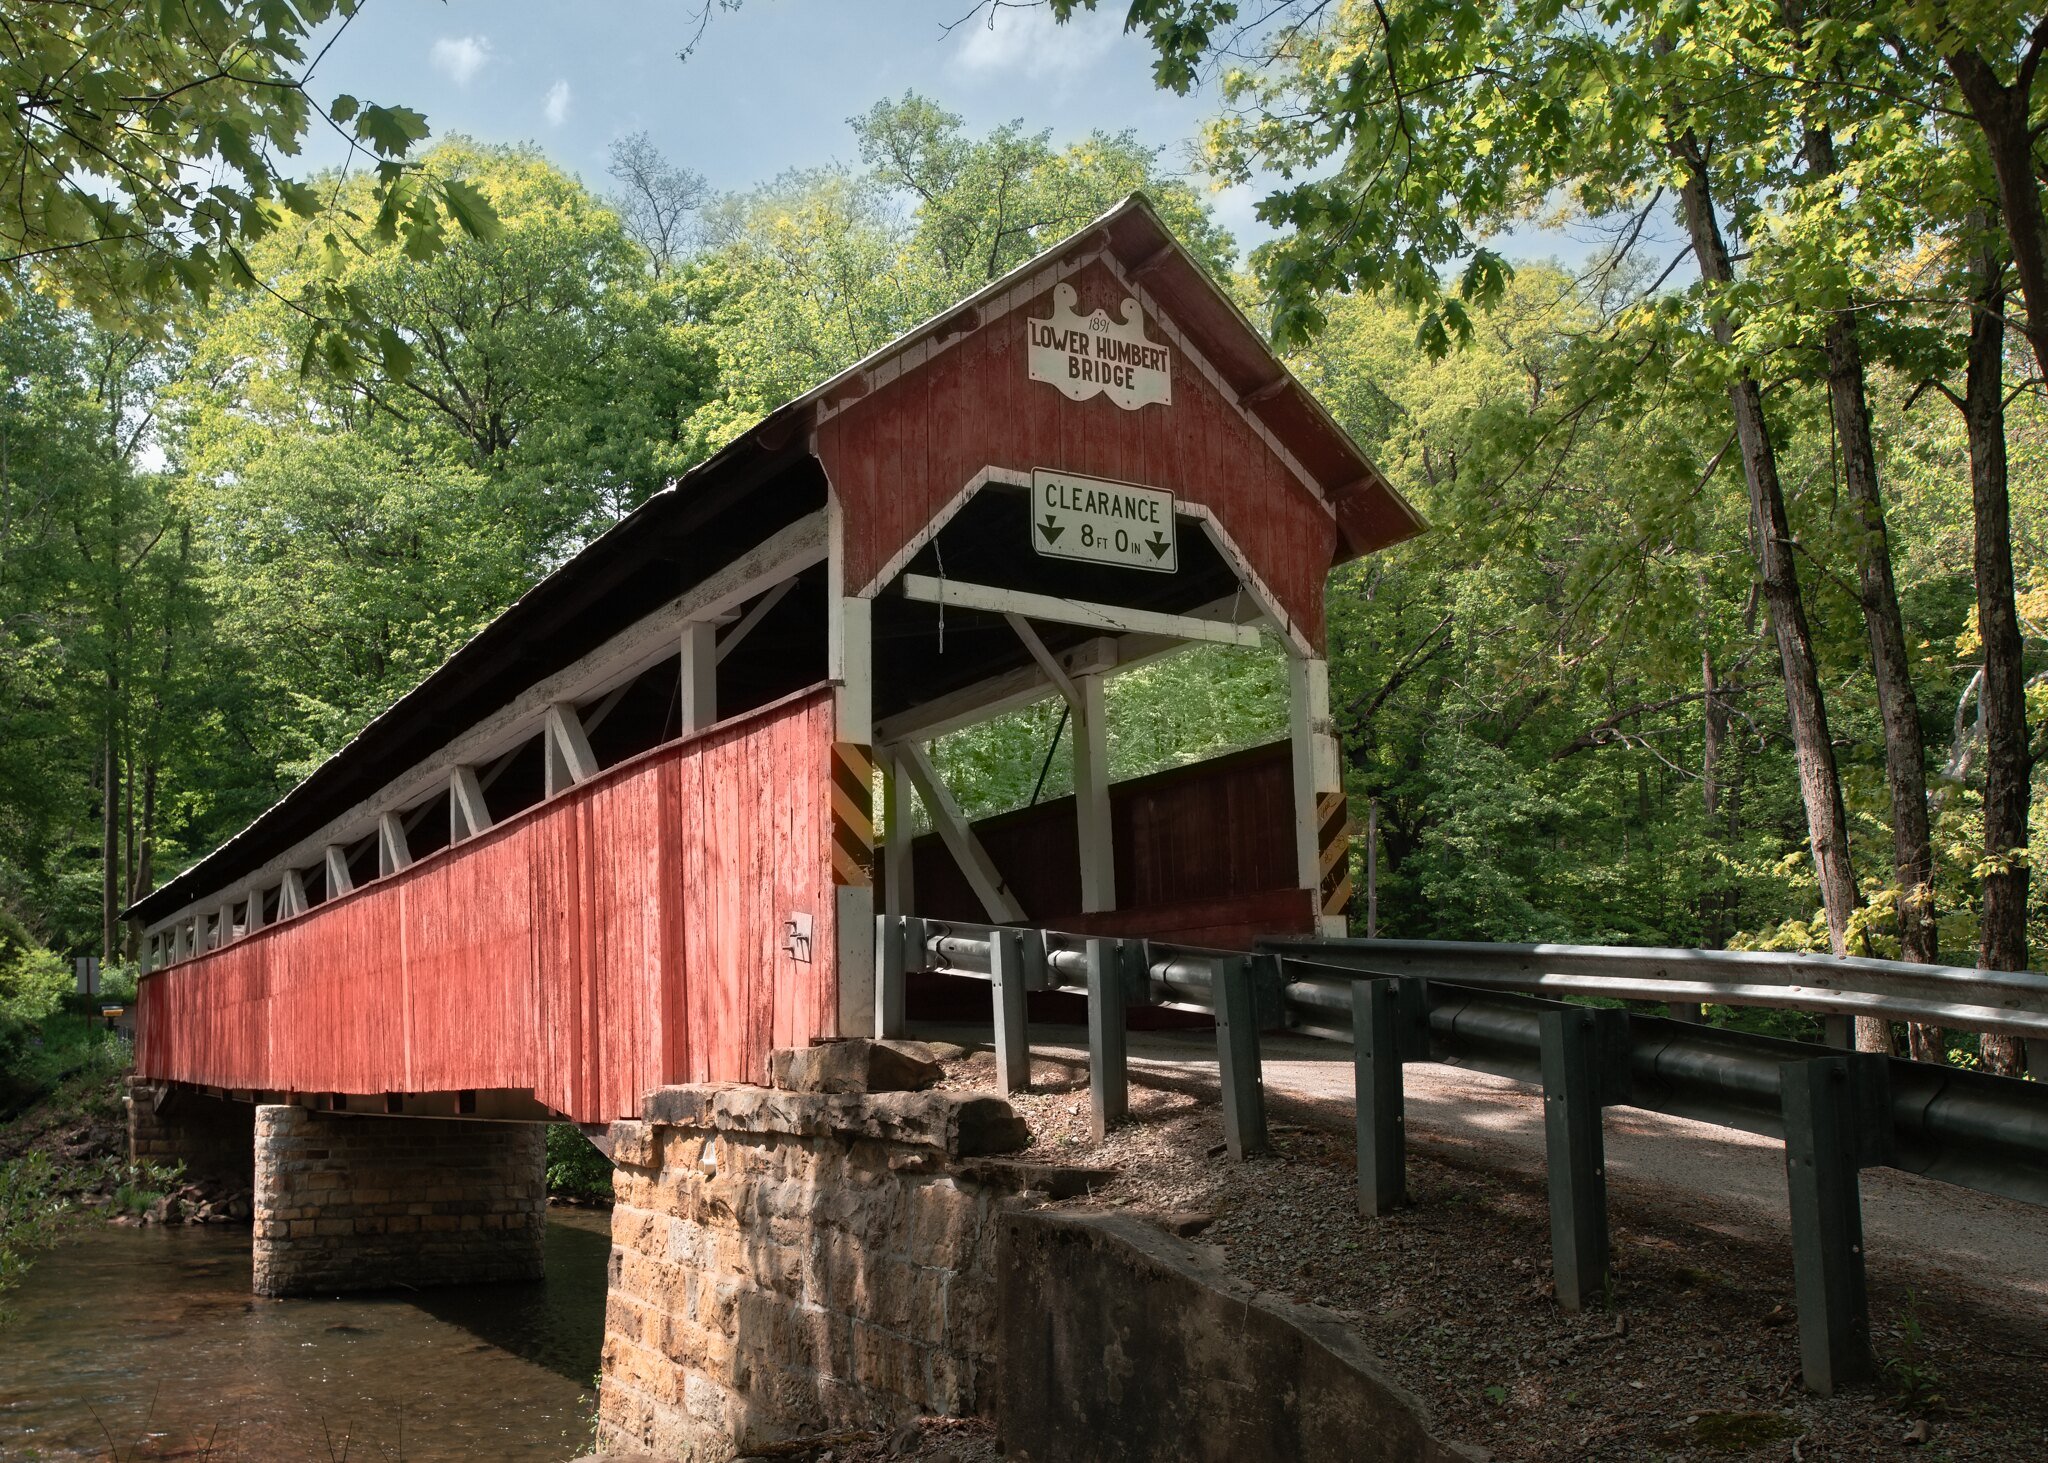  Humbert Covered Bridge in Lower Turkeyfoot Township in Somerset County, PA.  Built in 1891. 